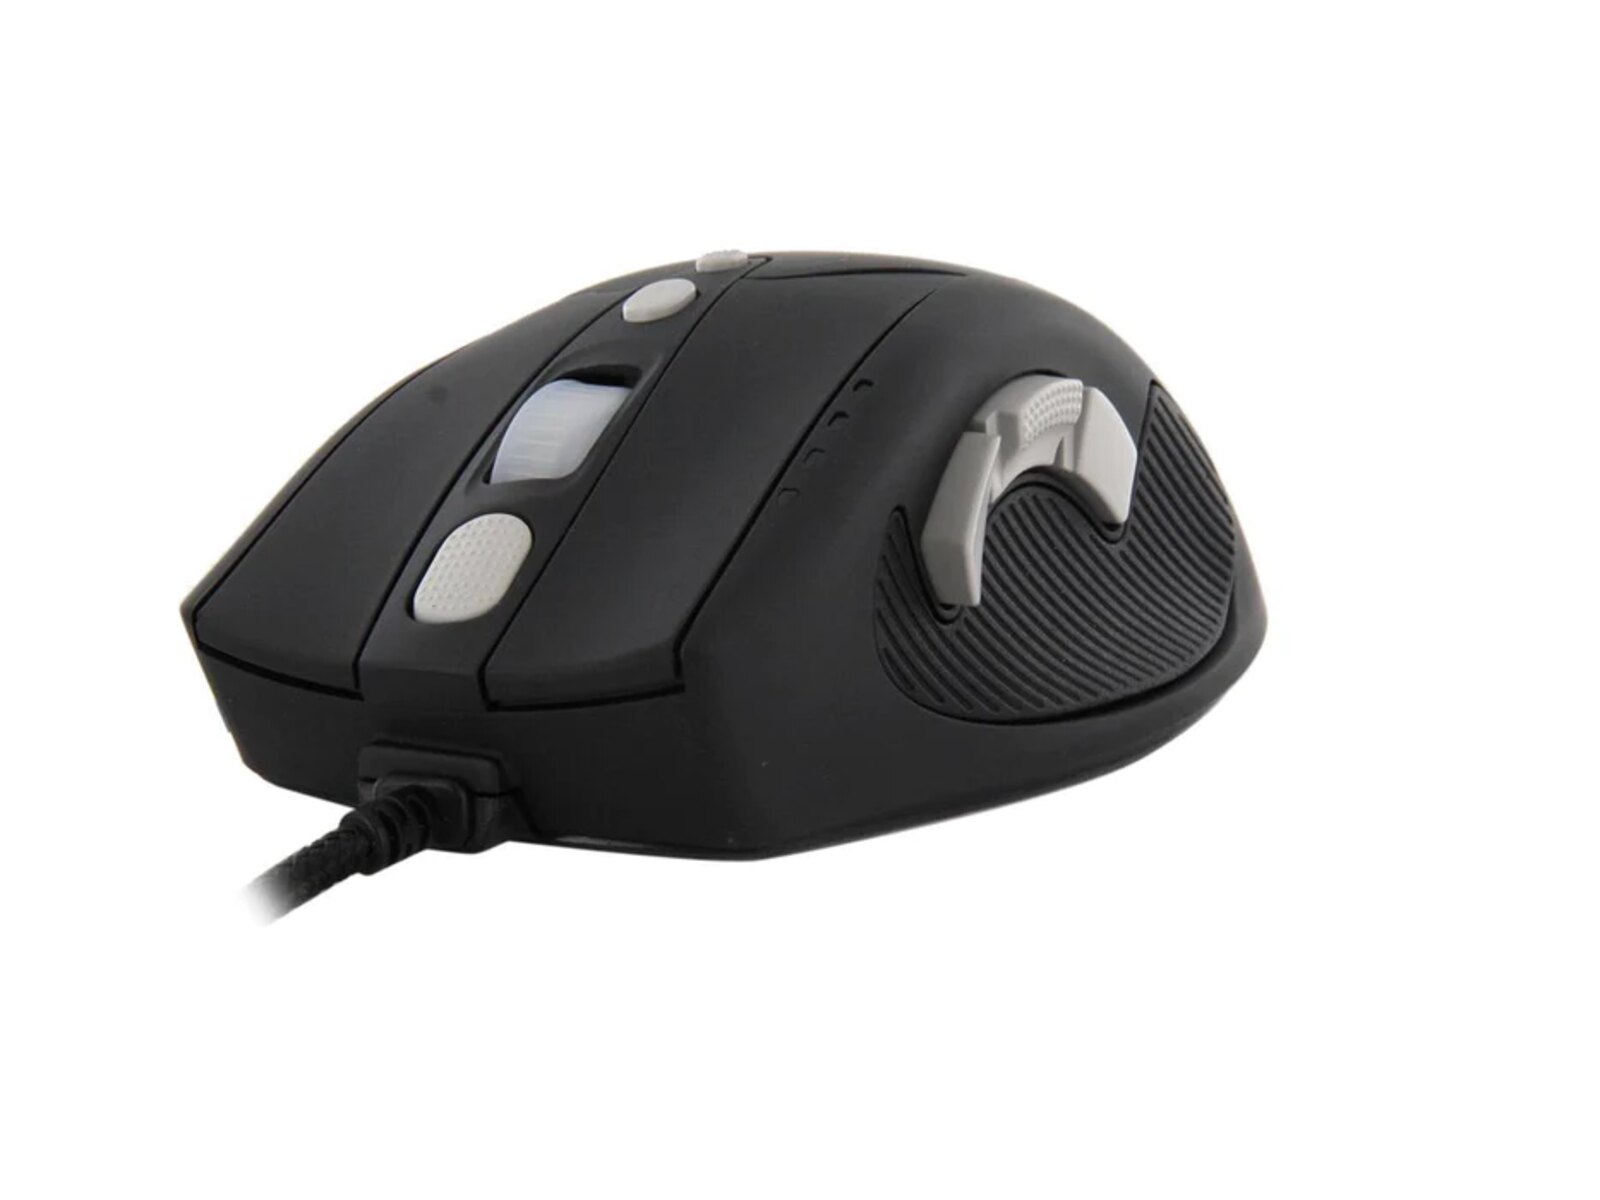 How Can I Install Software For My Rosewill Gaming Mouse RGM-1000?